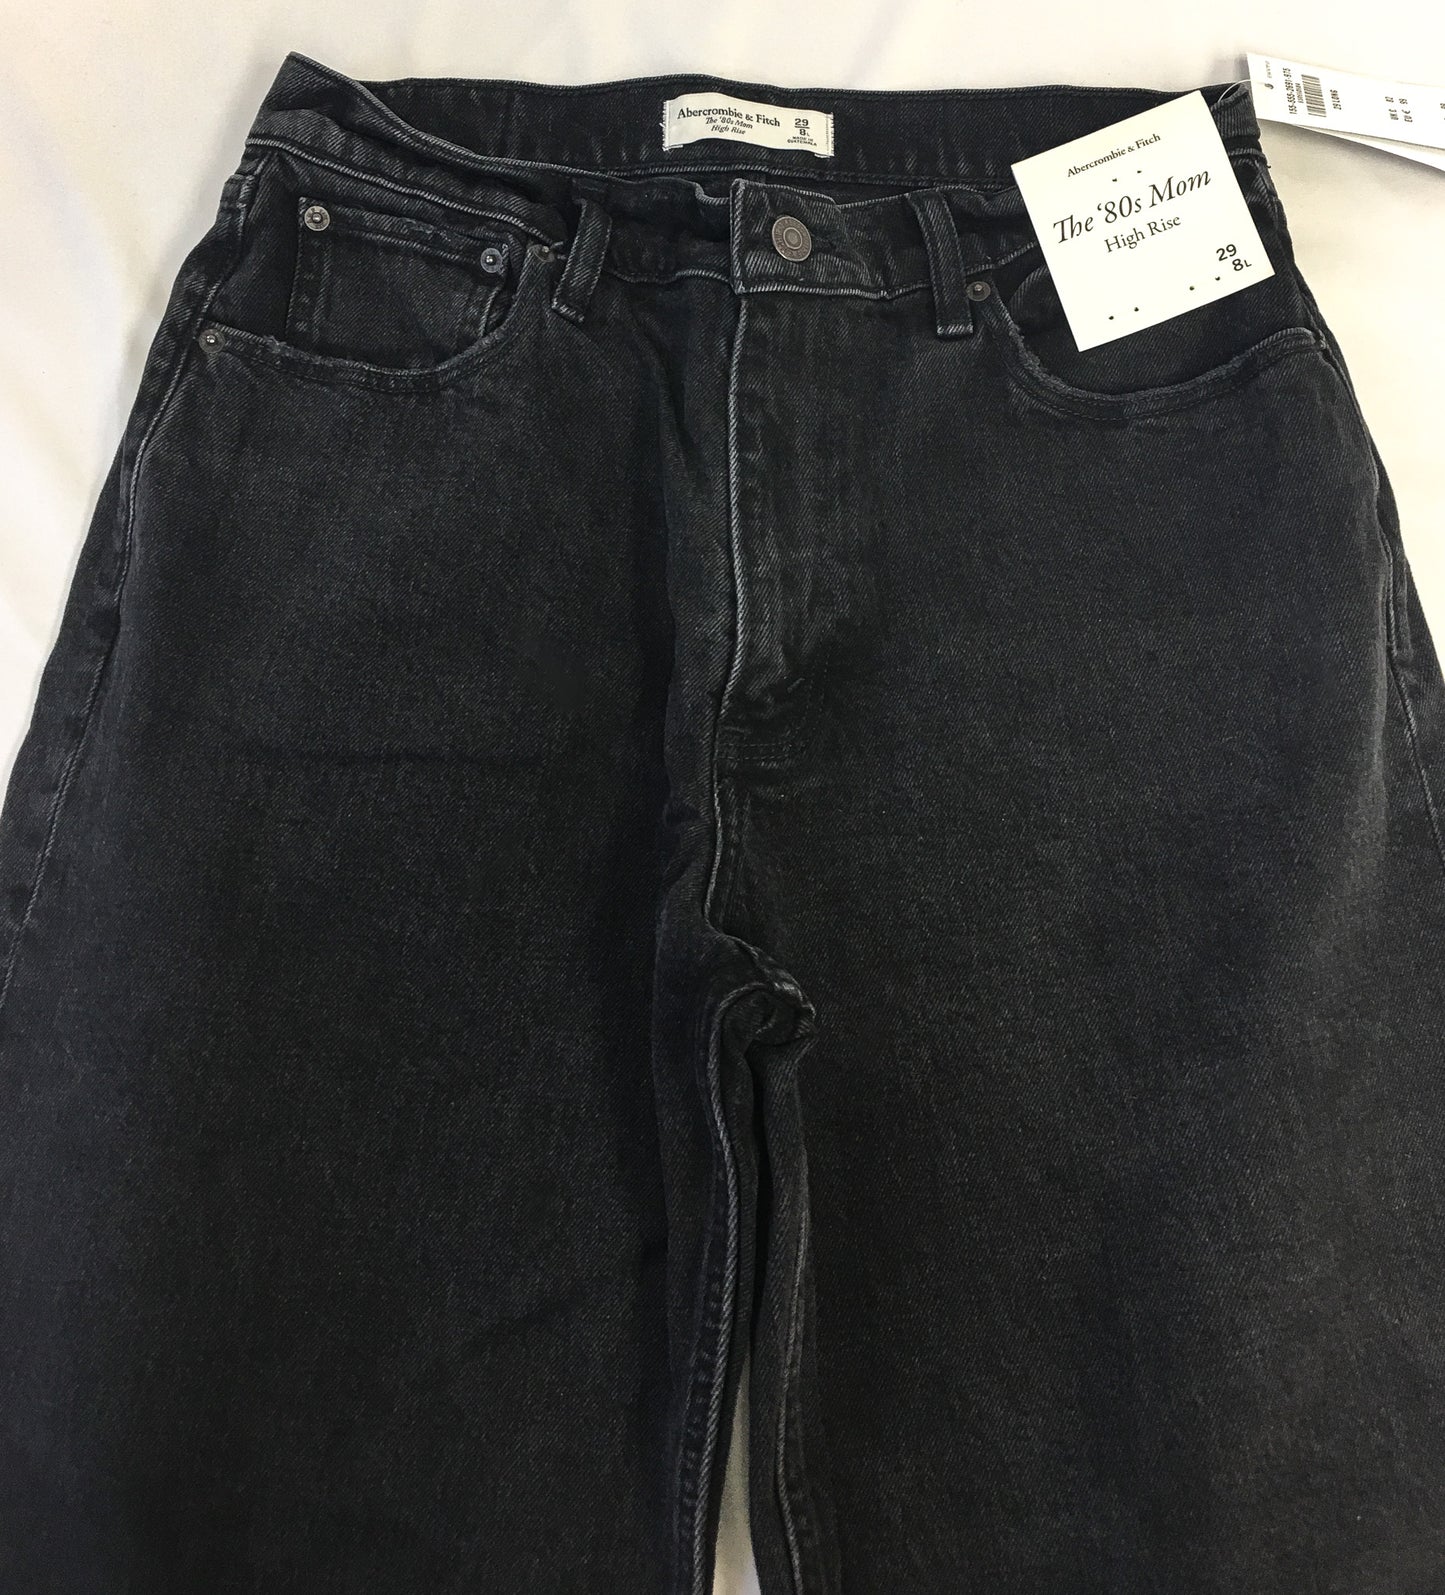 NWT Abercrombie and Fitch 80's Black Mom Jeans, Sz. 8, 29L